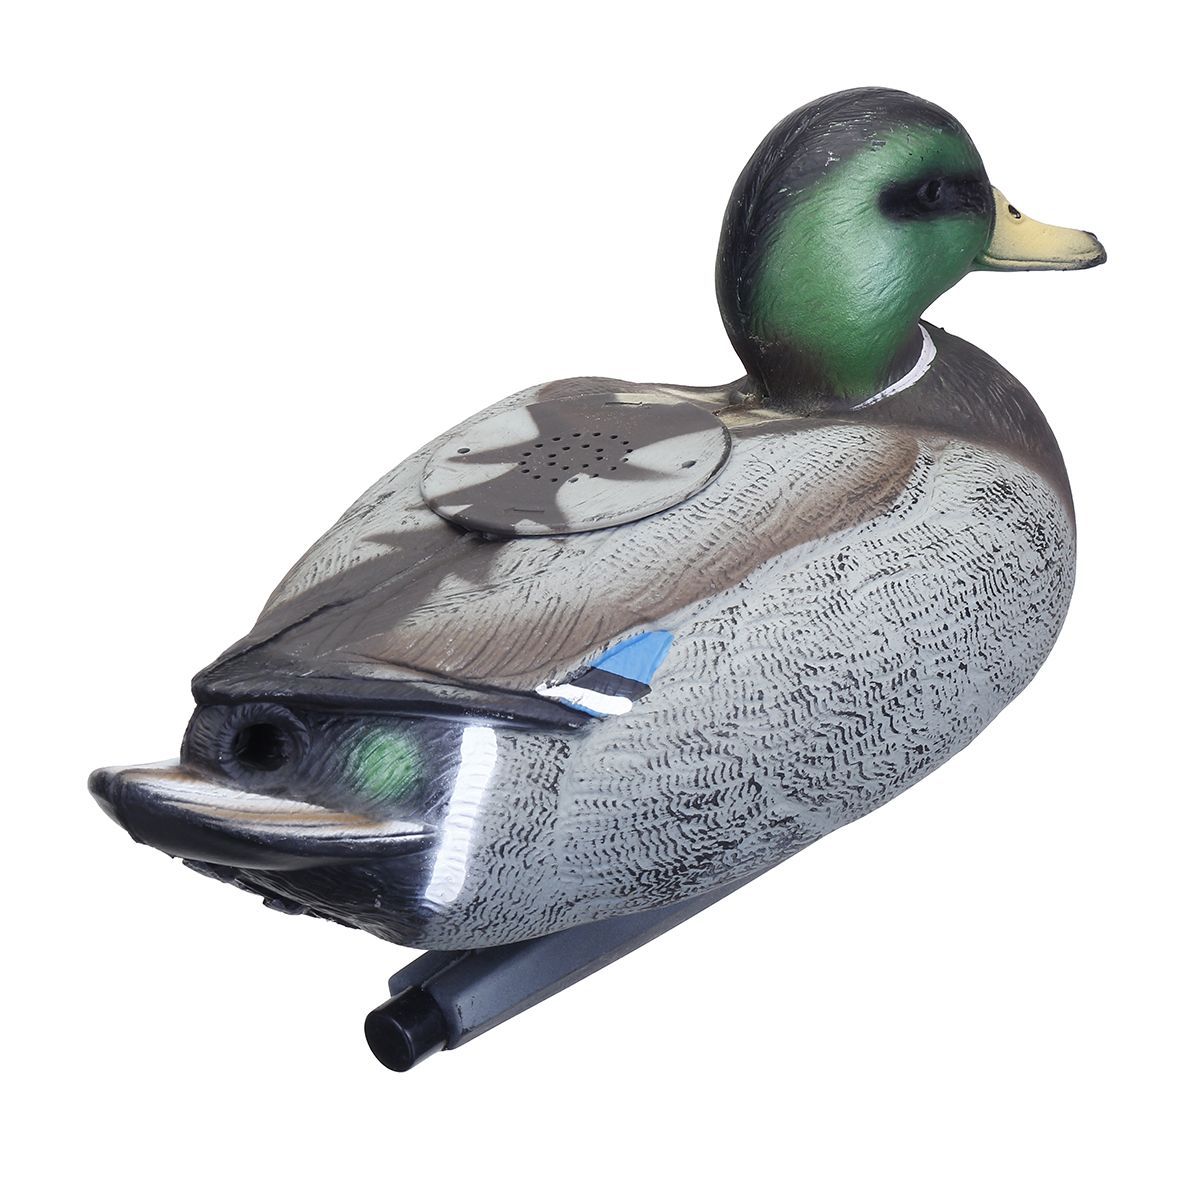 Floating-Mallard-Duck-Deadly-Fishing-Lure-Hen-For-Outdoor-Hunting-Decoy-Garden-Decorations-1582095